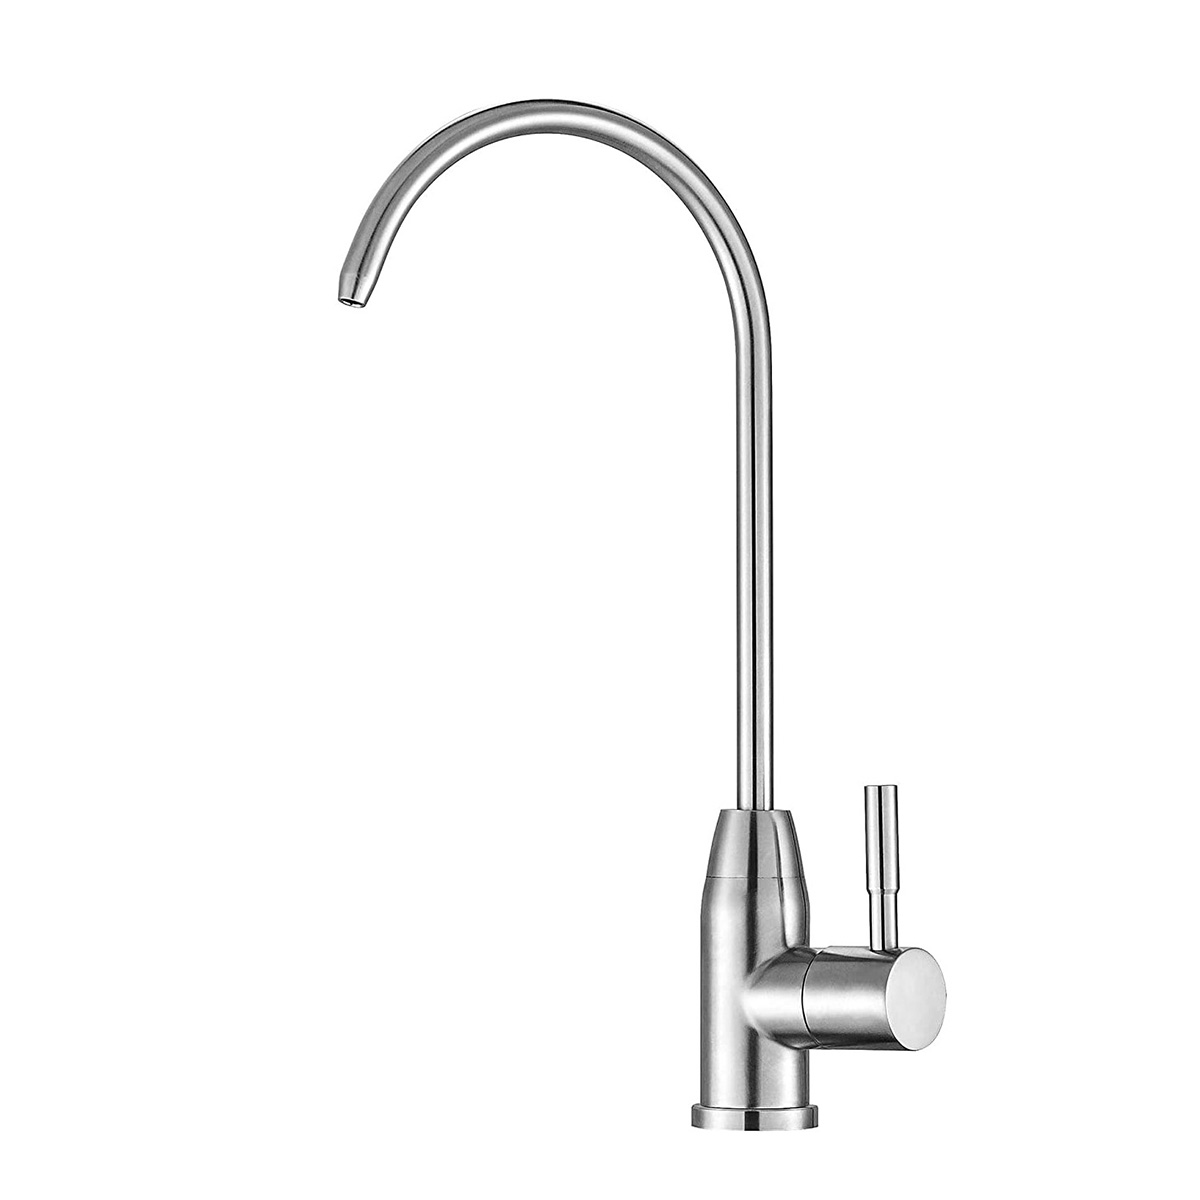 Food Grade Drinking Water Faucet Beverage Faucet